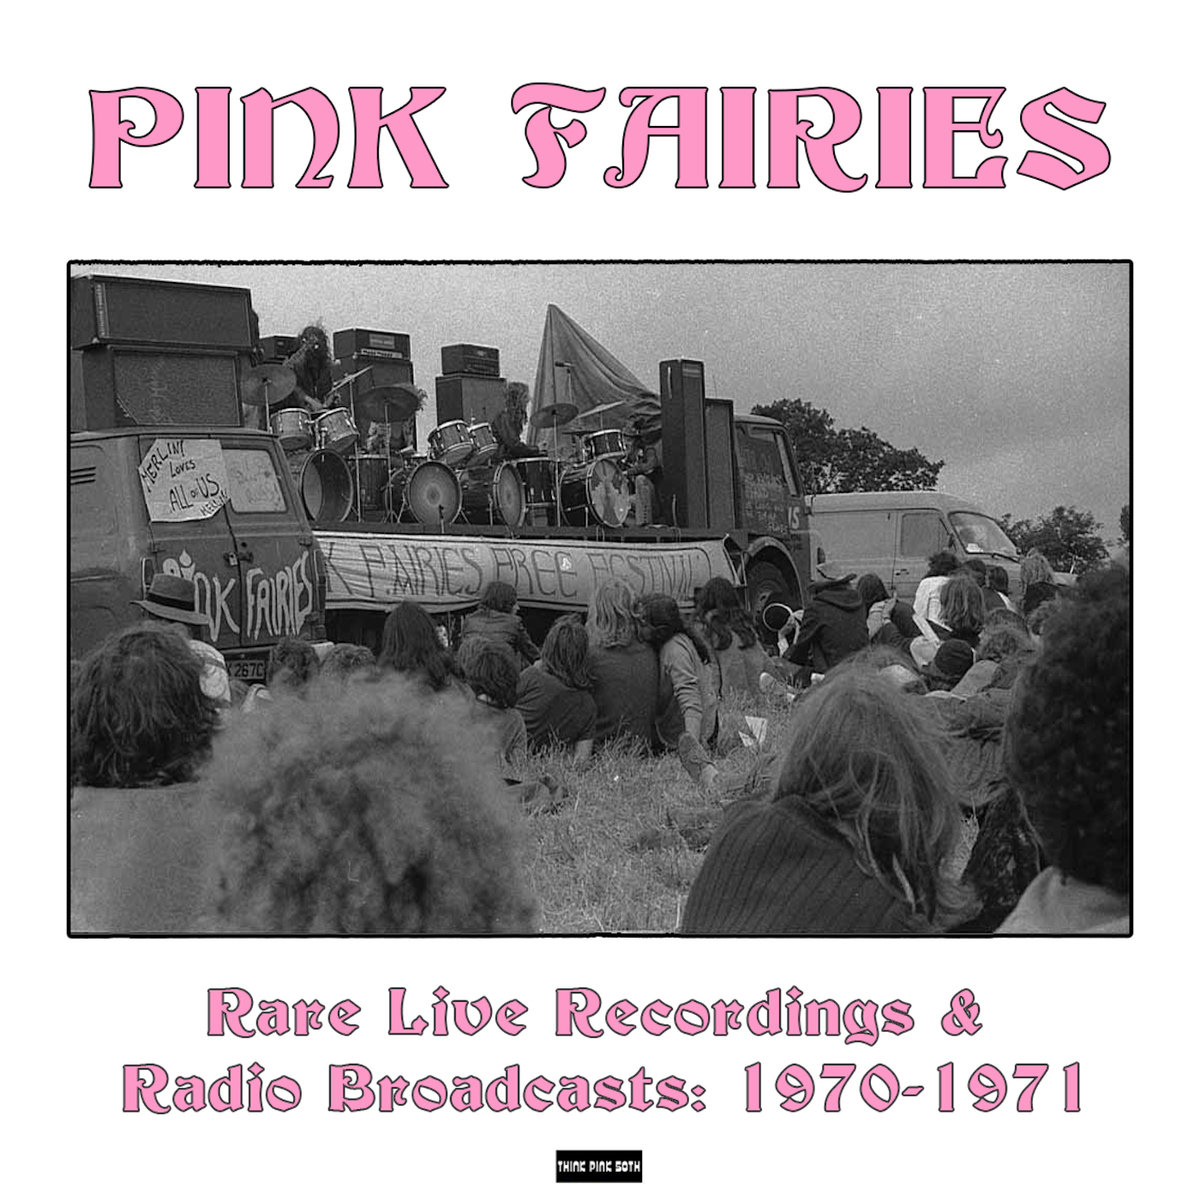 PINK FAIRIES / ピンク・フェアリーズ商品一覧｜PUNK｜ディスク